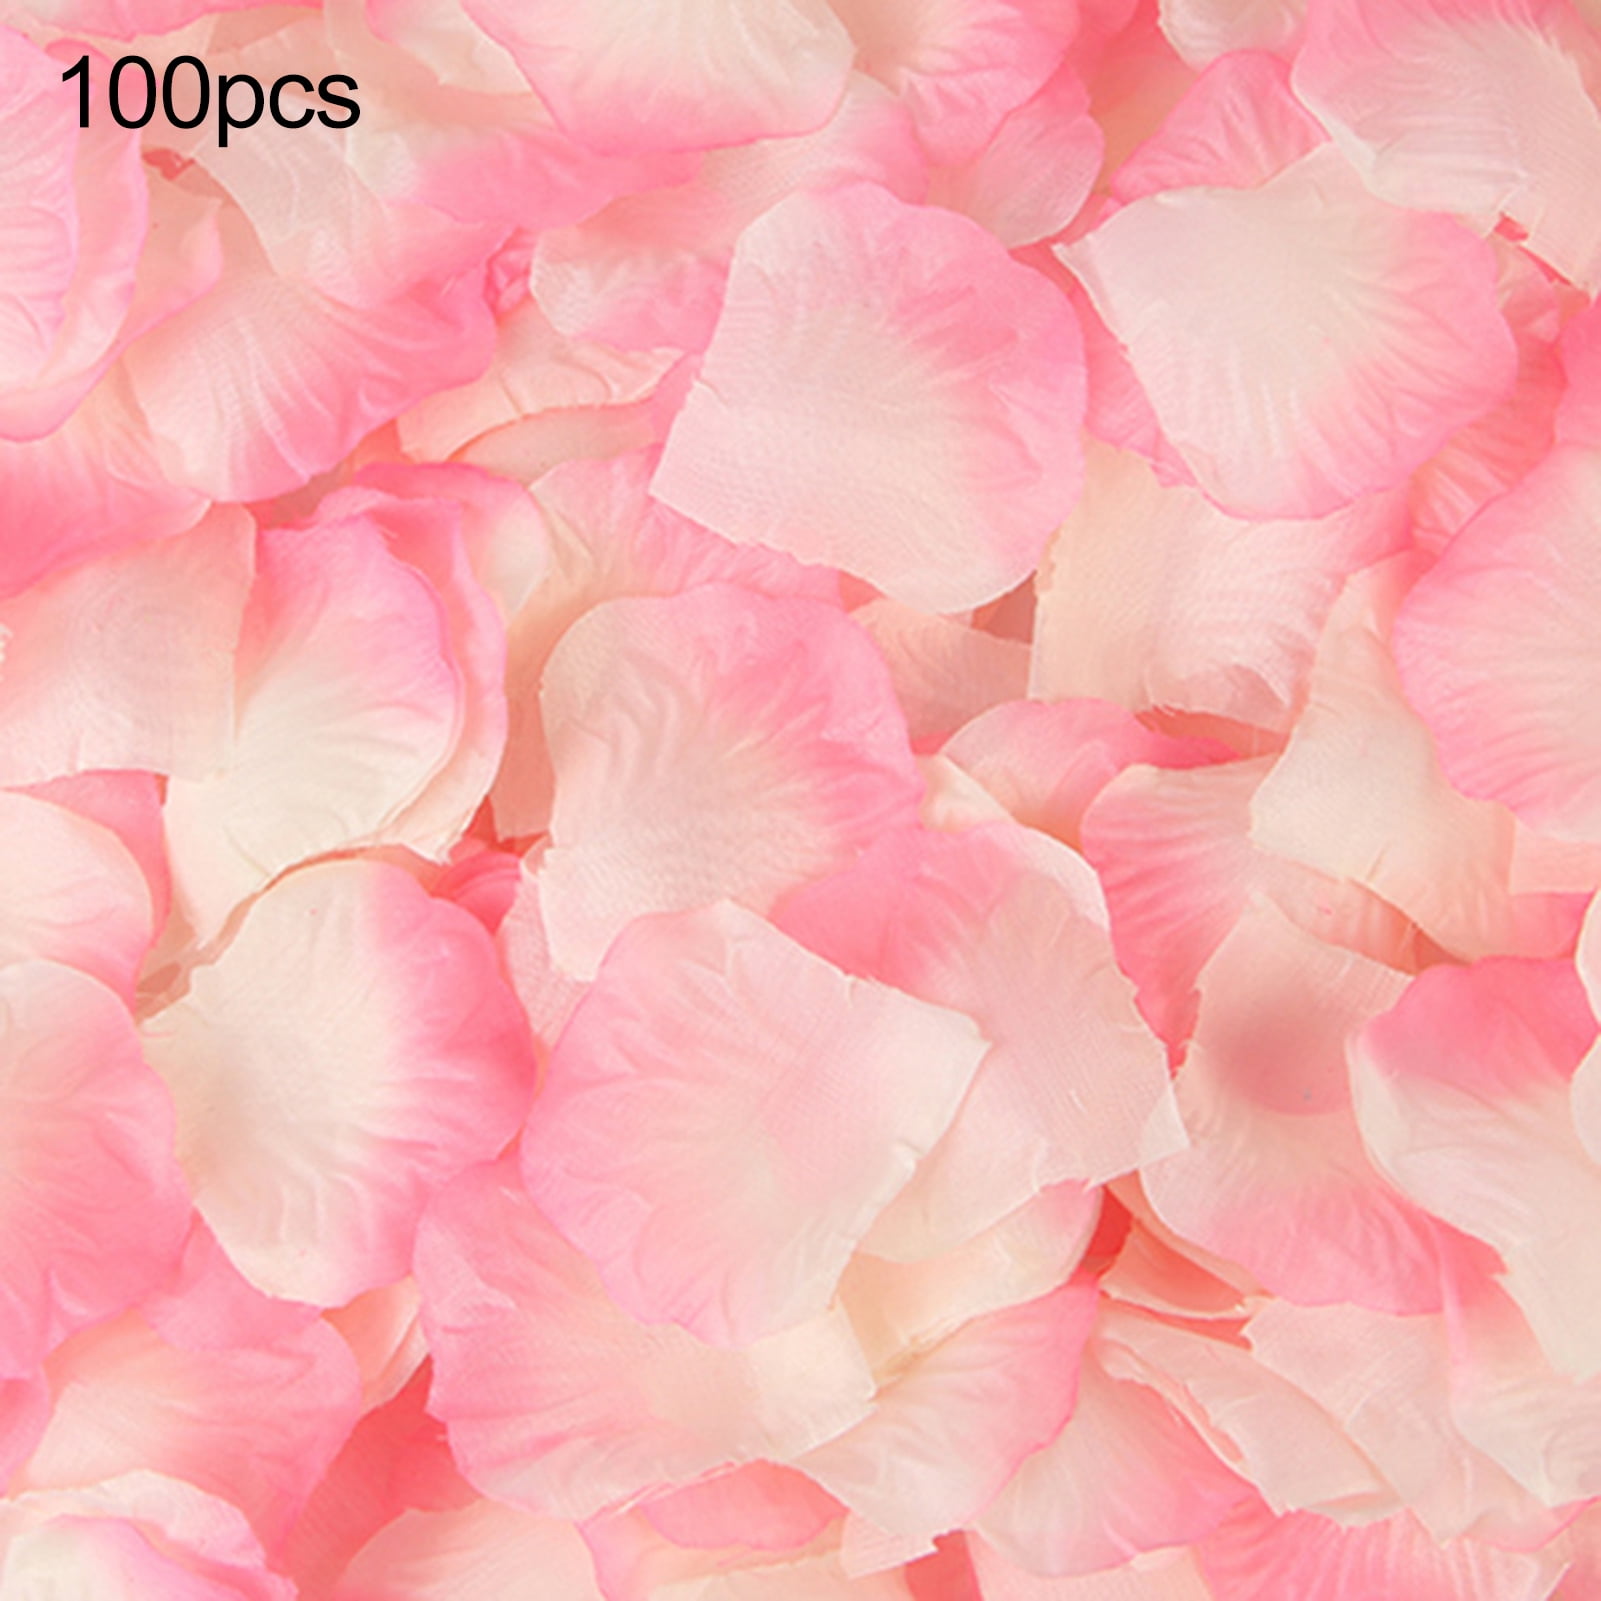 1000pcs Simulation Rose Petals For Wedding Party Table Confetti Decorations 